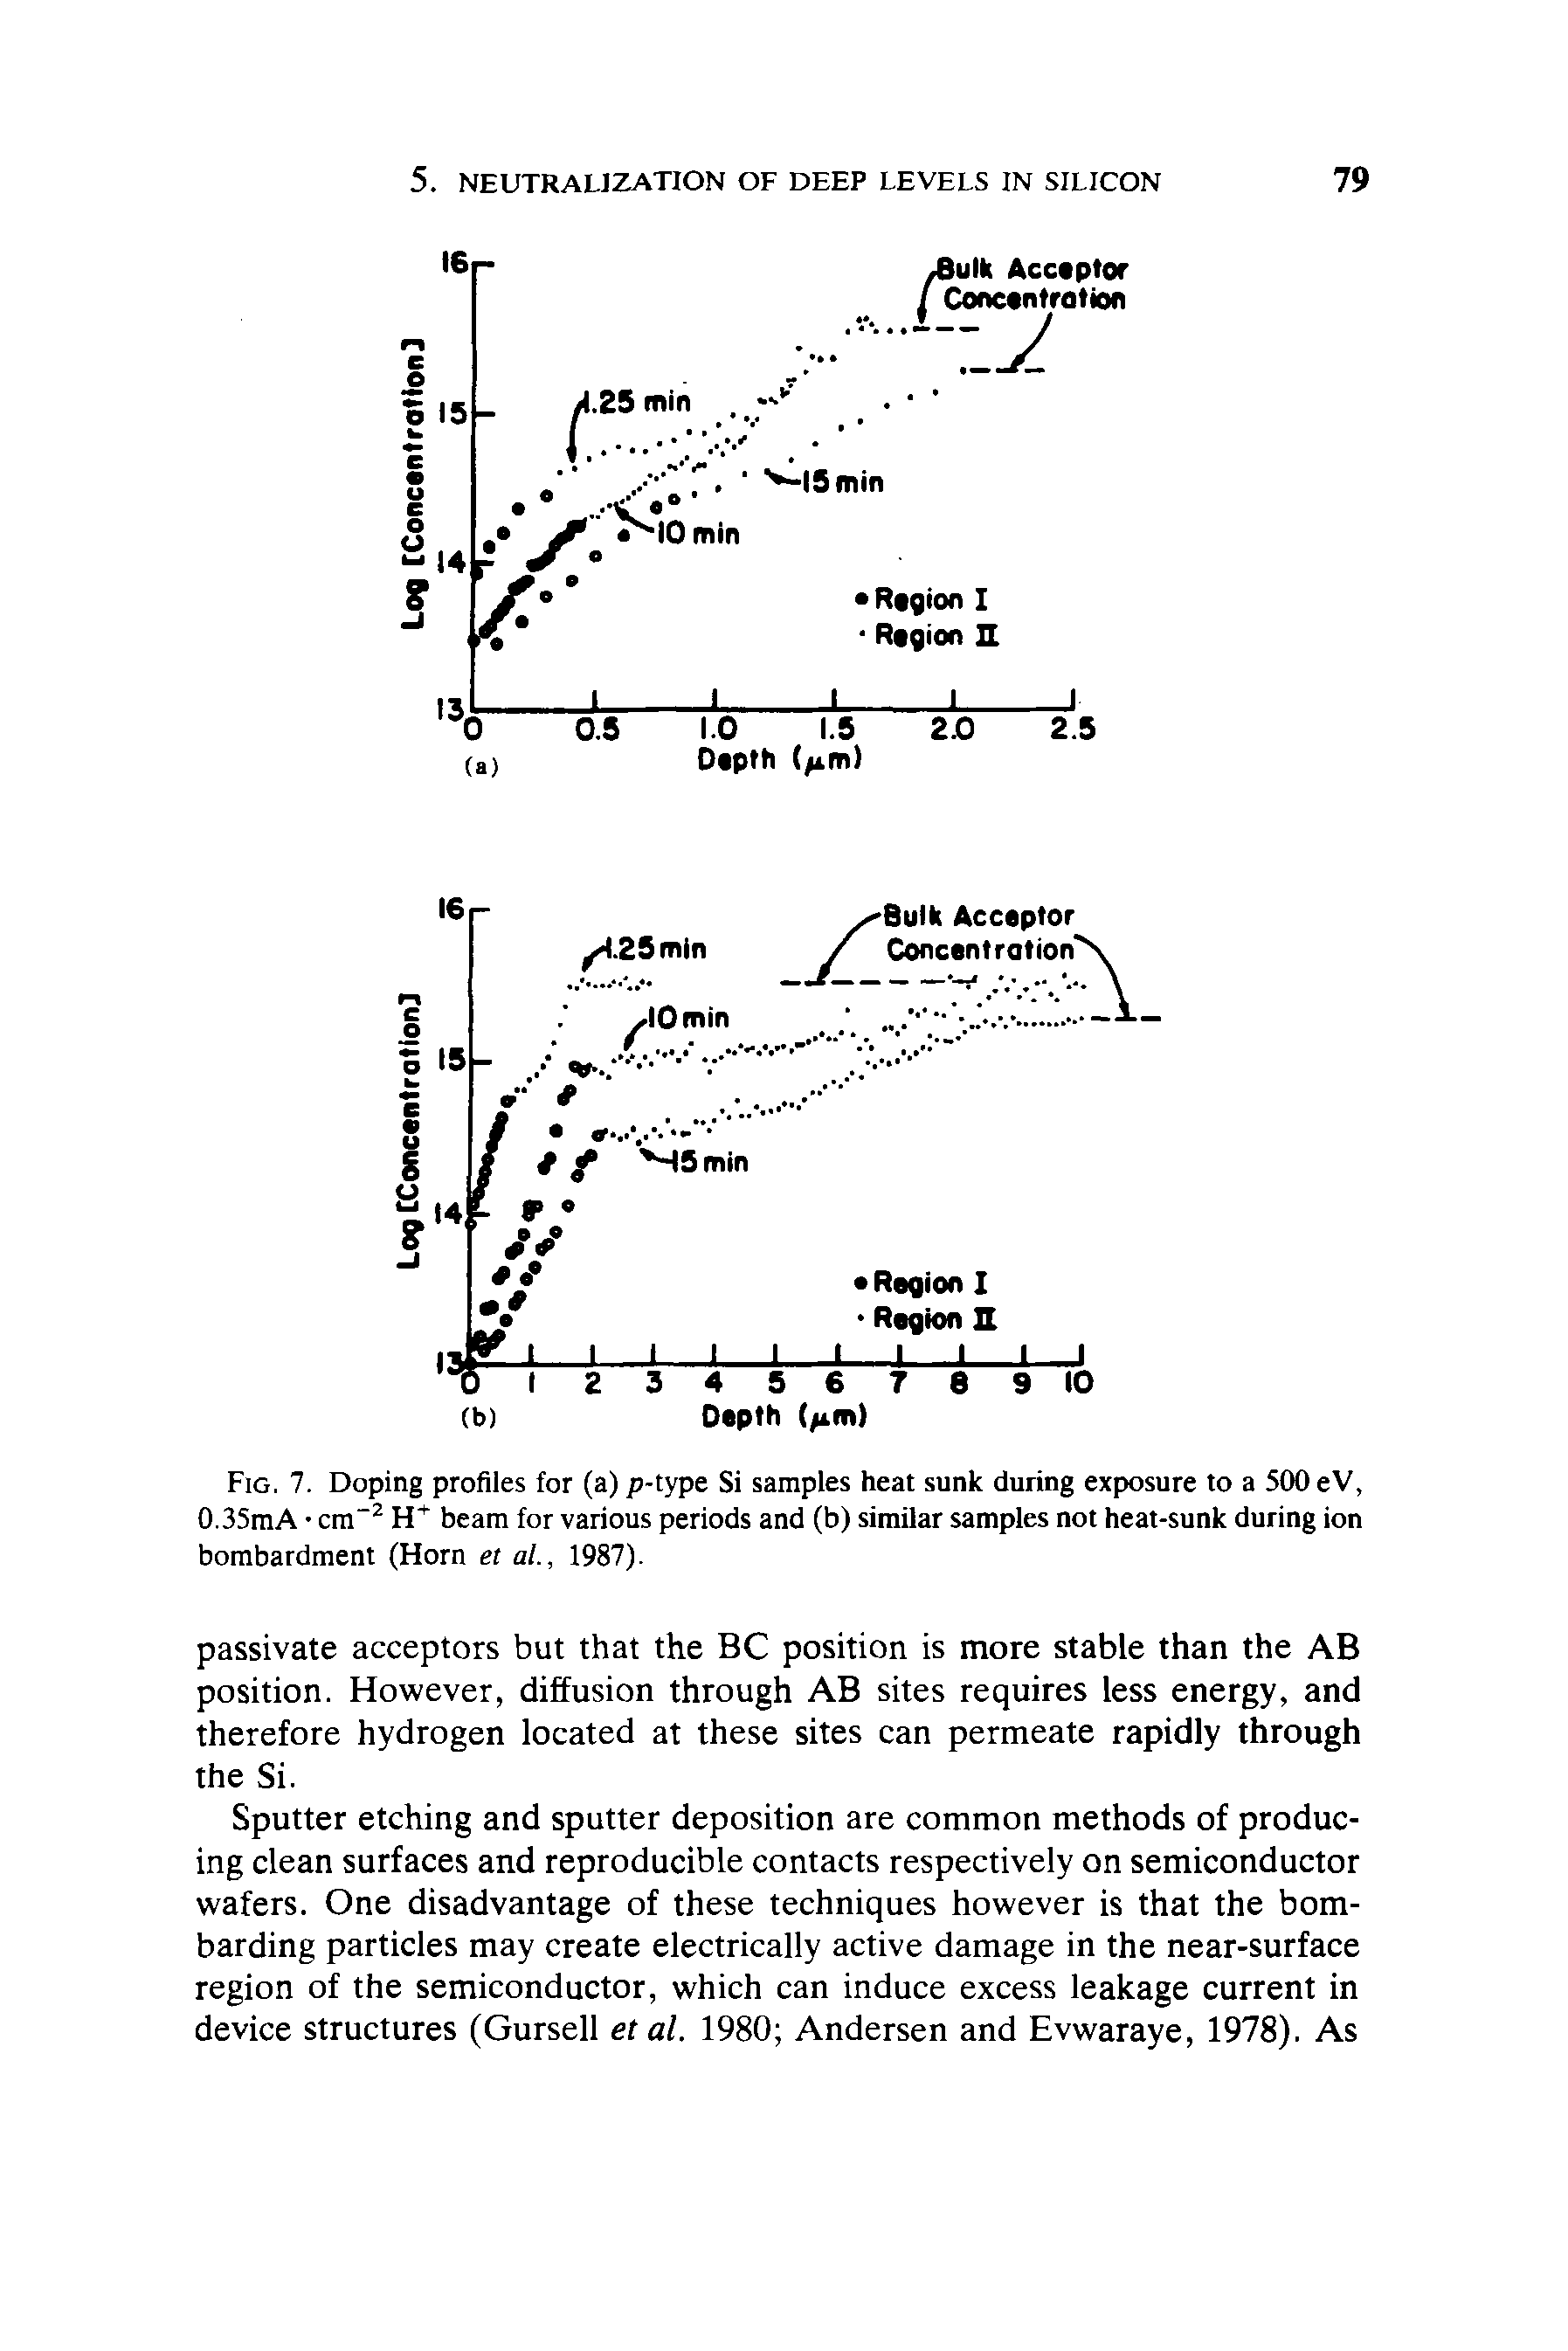 Fig. 7. Doping profiles for (a) p-type Si samples heat sunk during exposure to a 500 eV, 0.35mA cm-2 H+ beam for various periods and (b) similar samples not heat-sunk during ion bombardment (Horn et al., 1987).